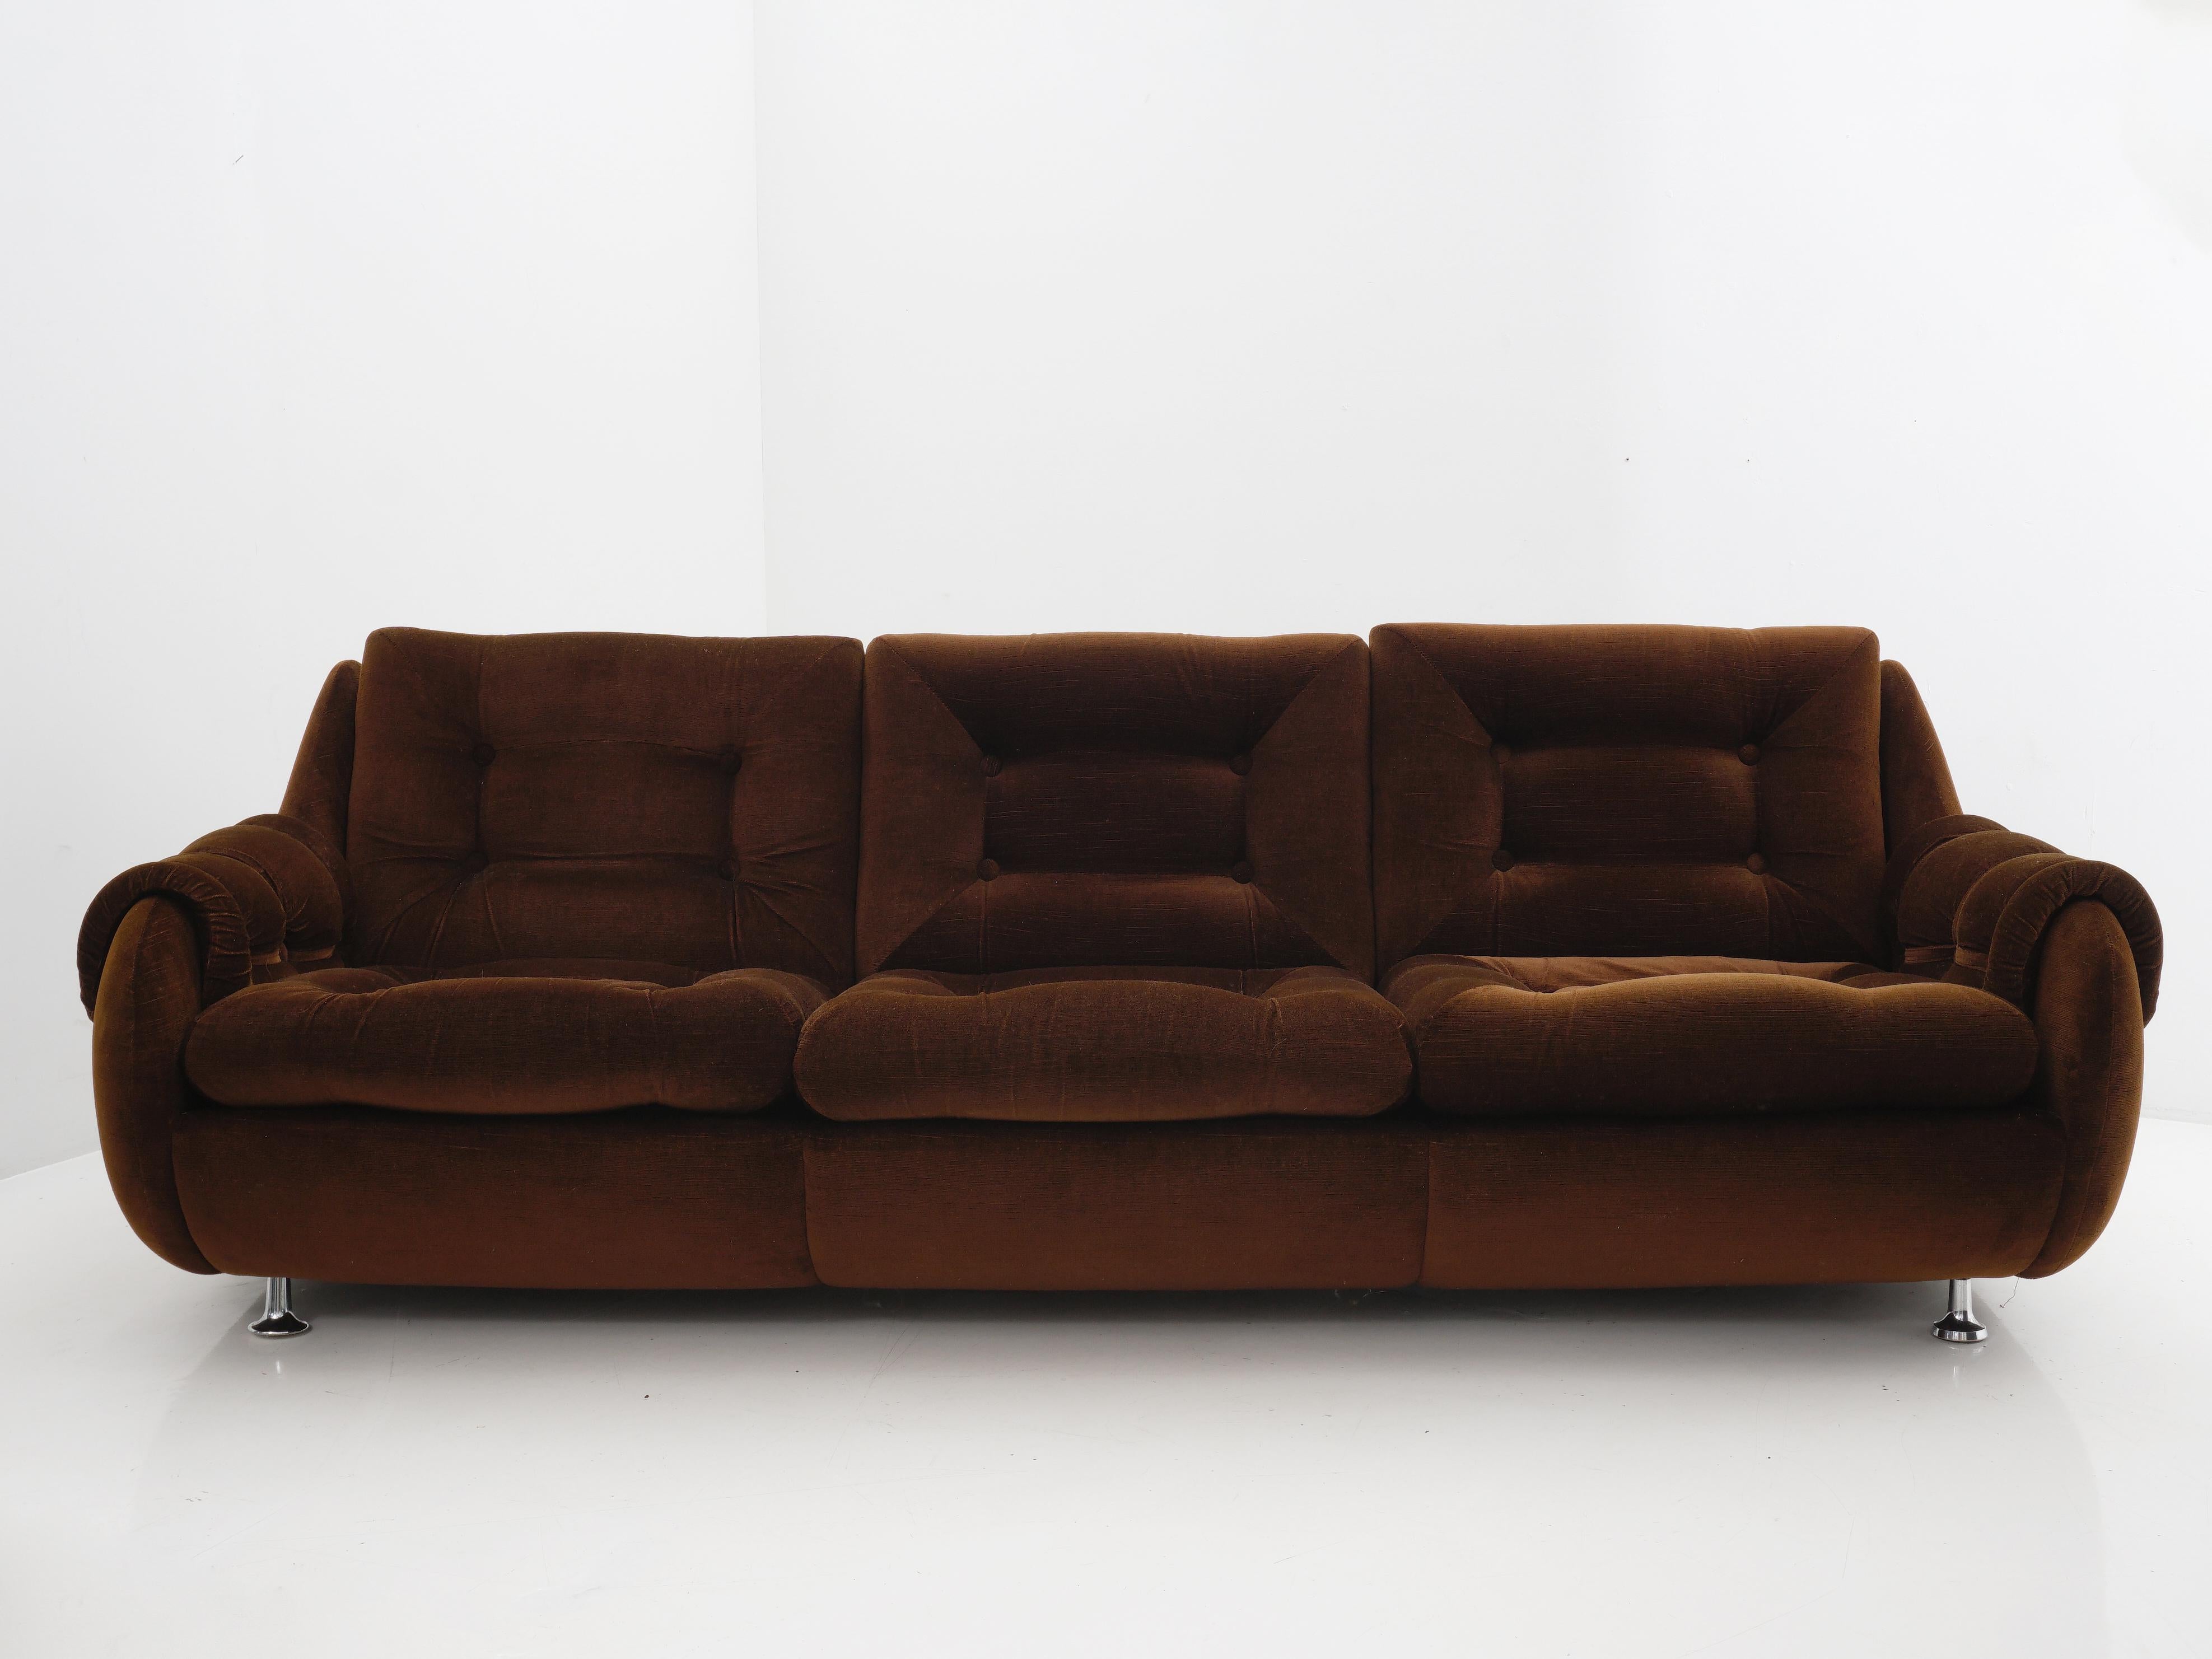 Sink into the lap of midcentury Scandinavian luxury with our rich 1970s brown velvet sofa straight from the design havens of Sweden. It's not just seating, it's a time machine to an era of sleek chrome details and unmatched comfort.

- 29